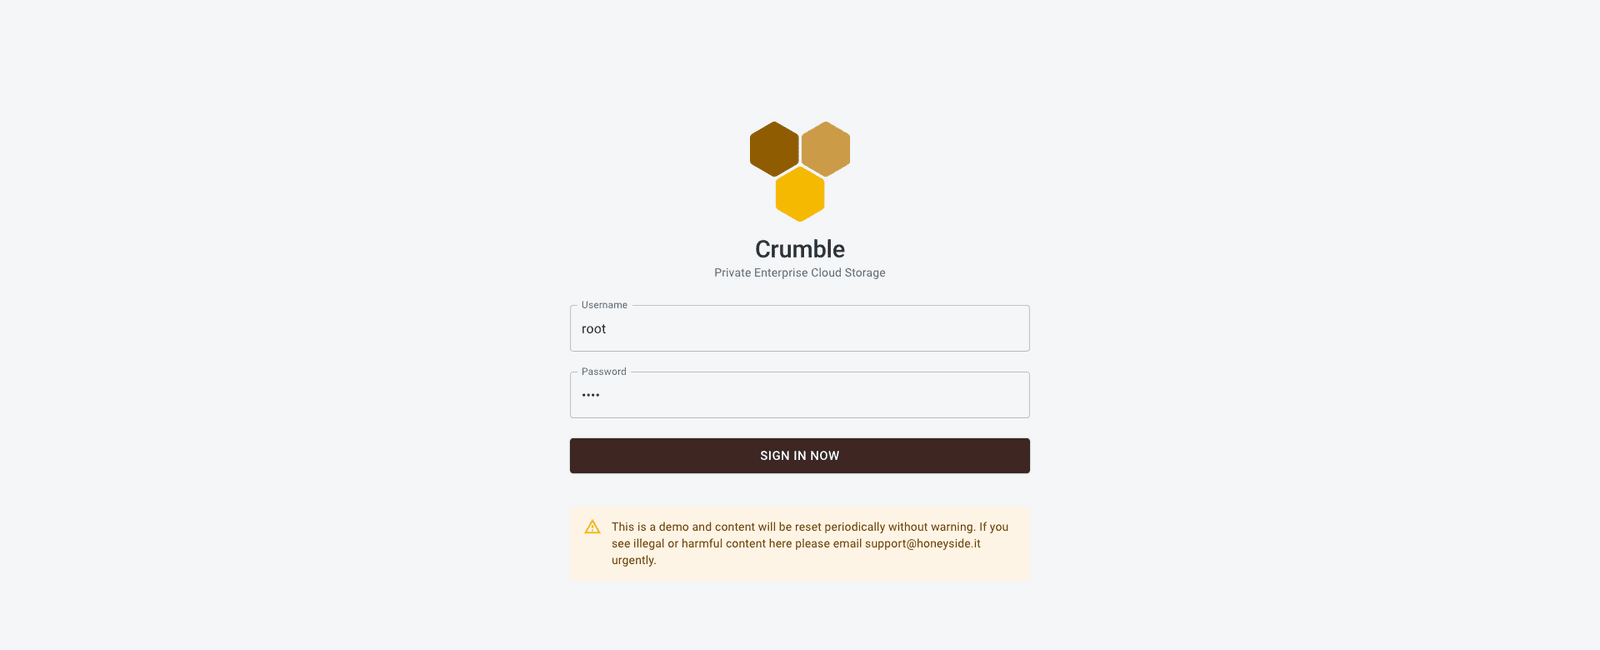 Crumble is available for sale